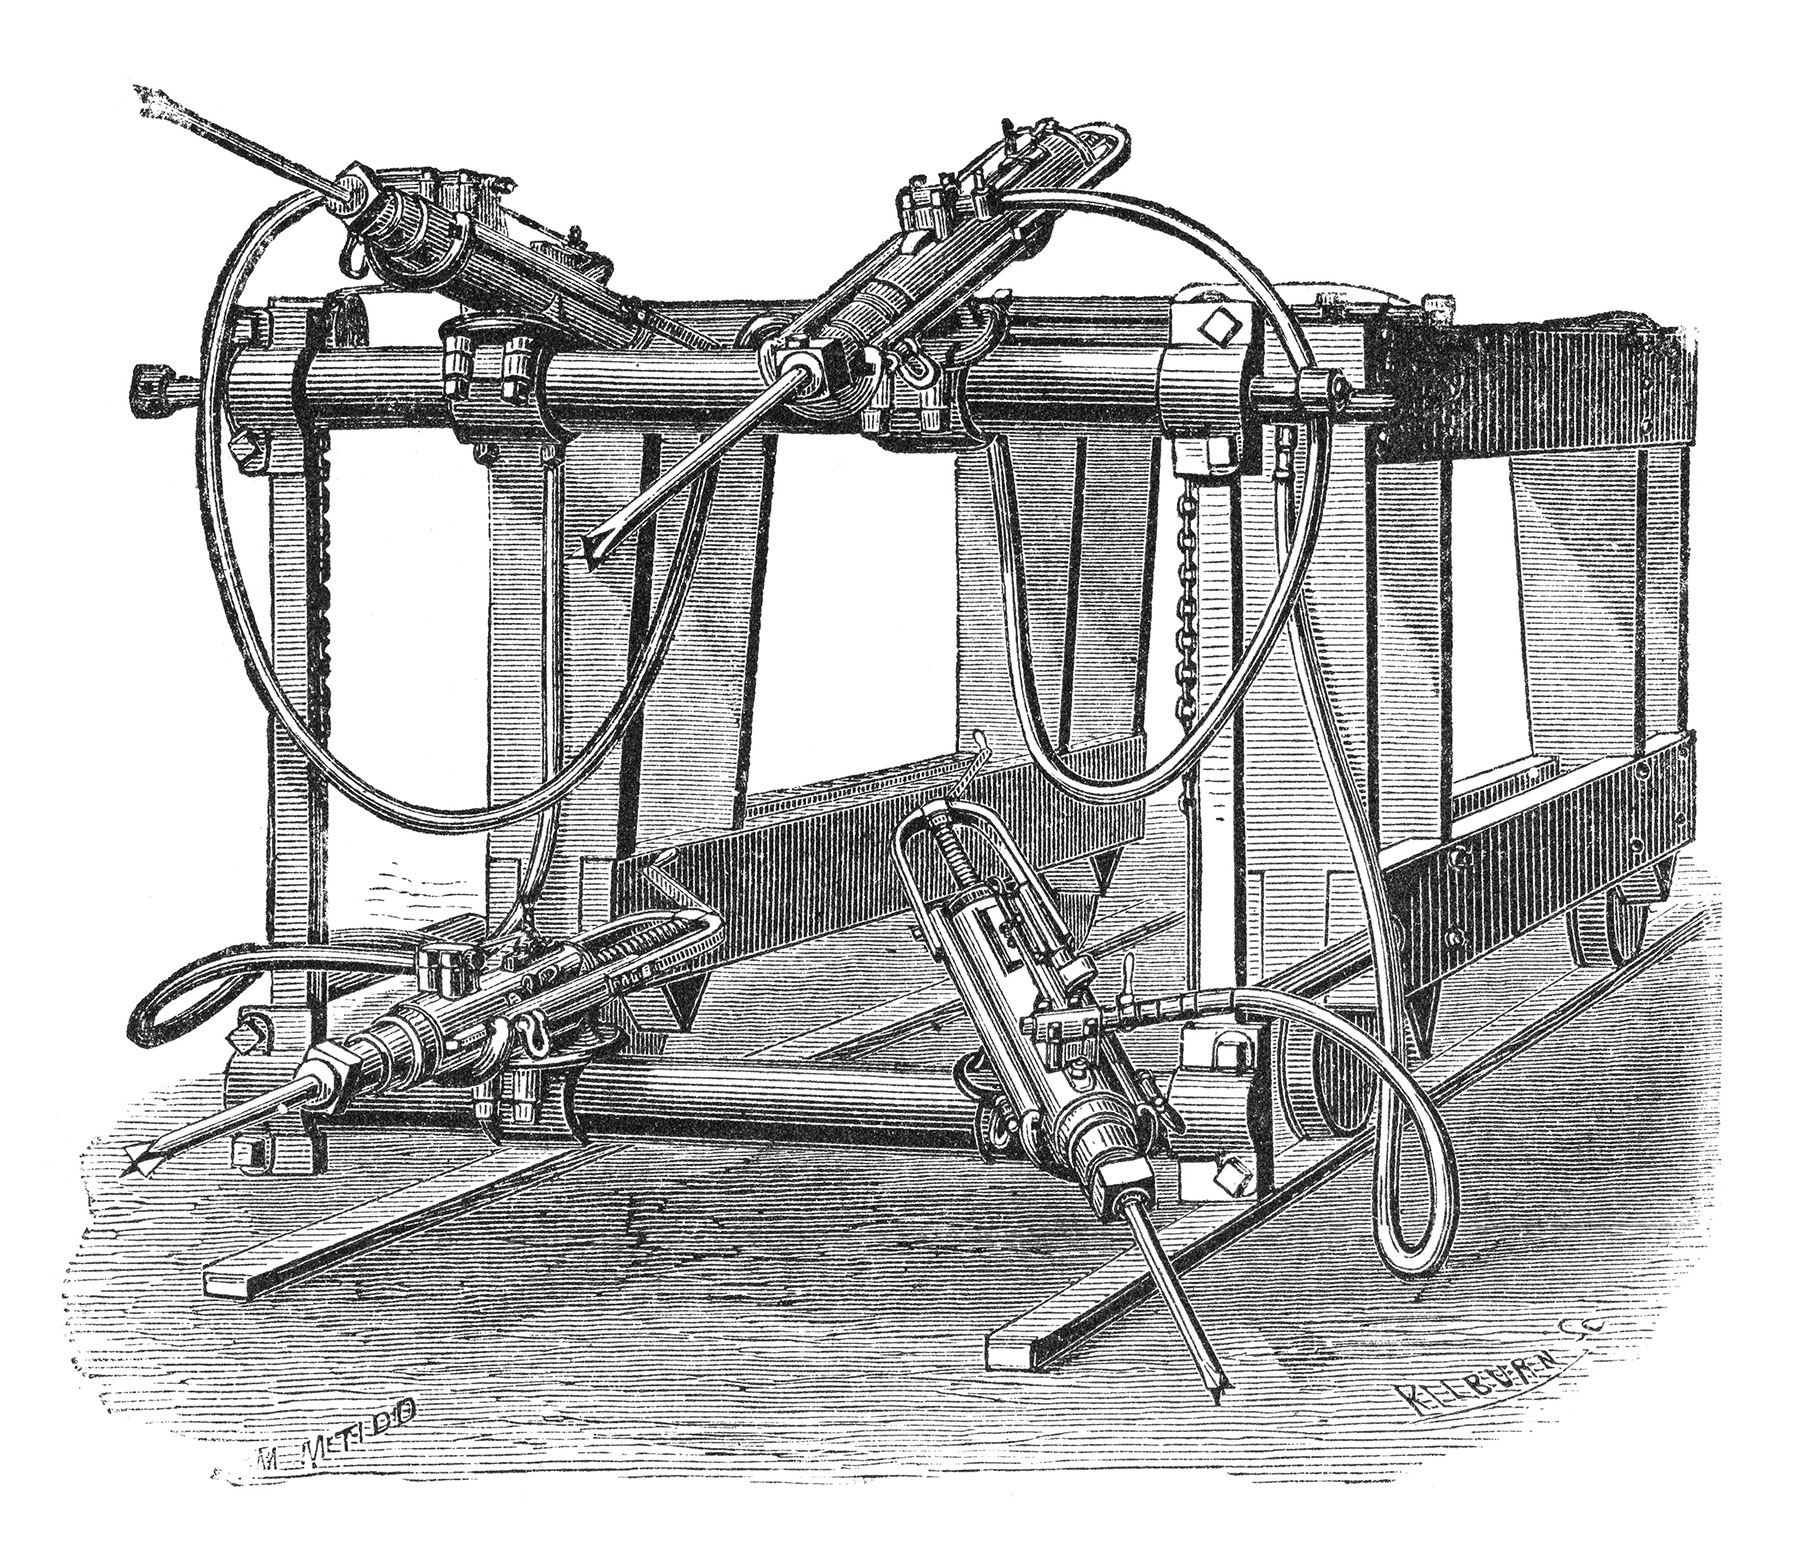 Image shows a machine on wooden rails. The machine has four arms that were used to blast through rock. 